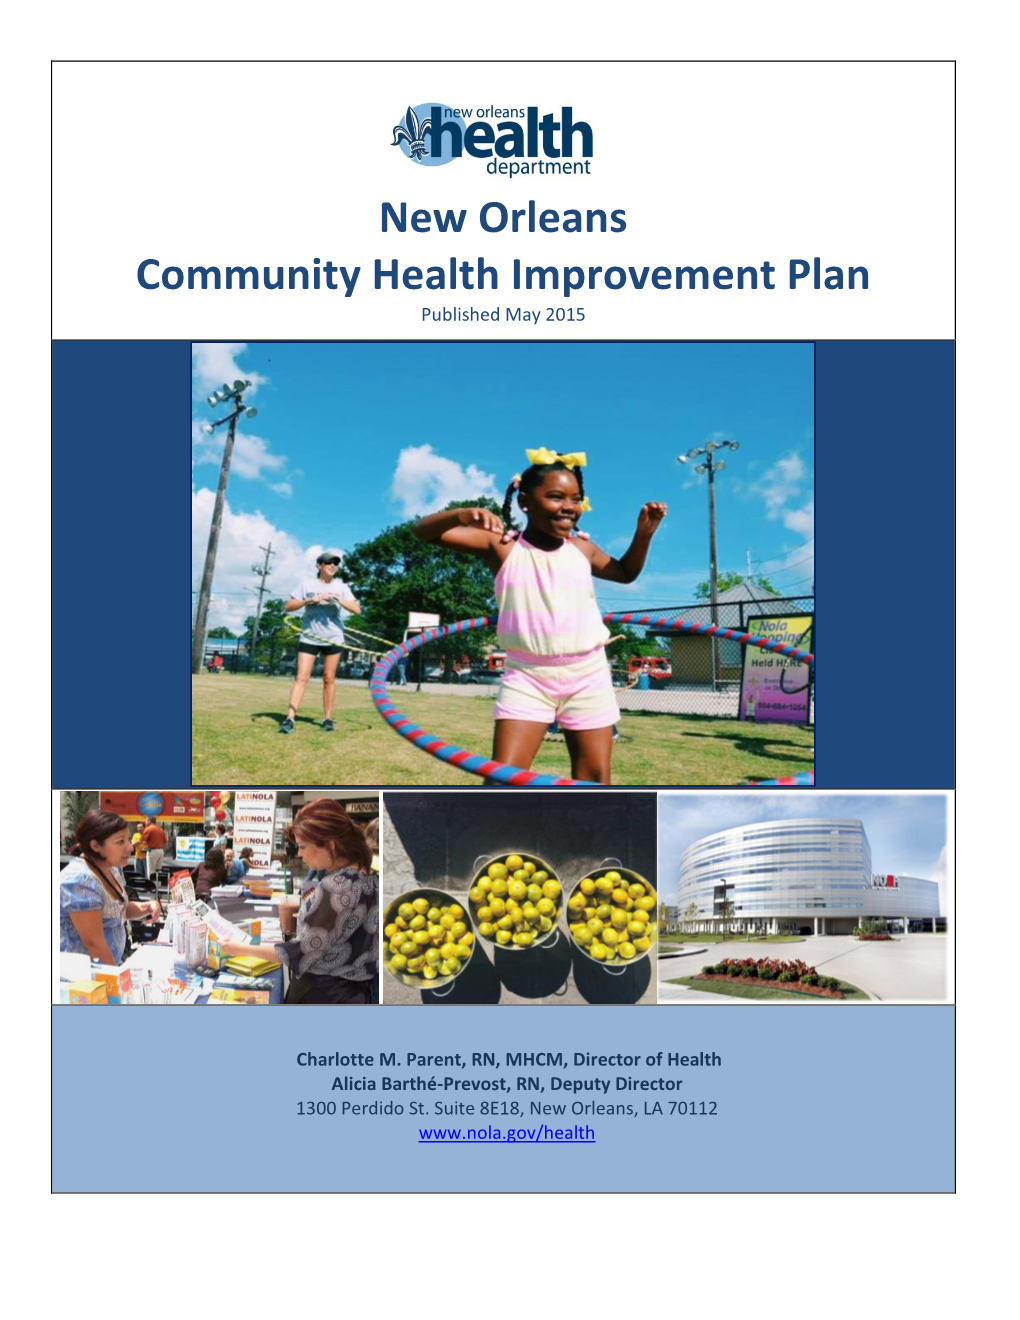 Community Health Improvement Plan Published May 2015